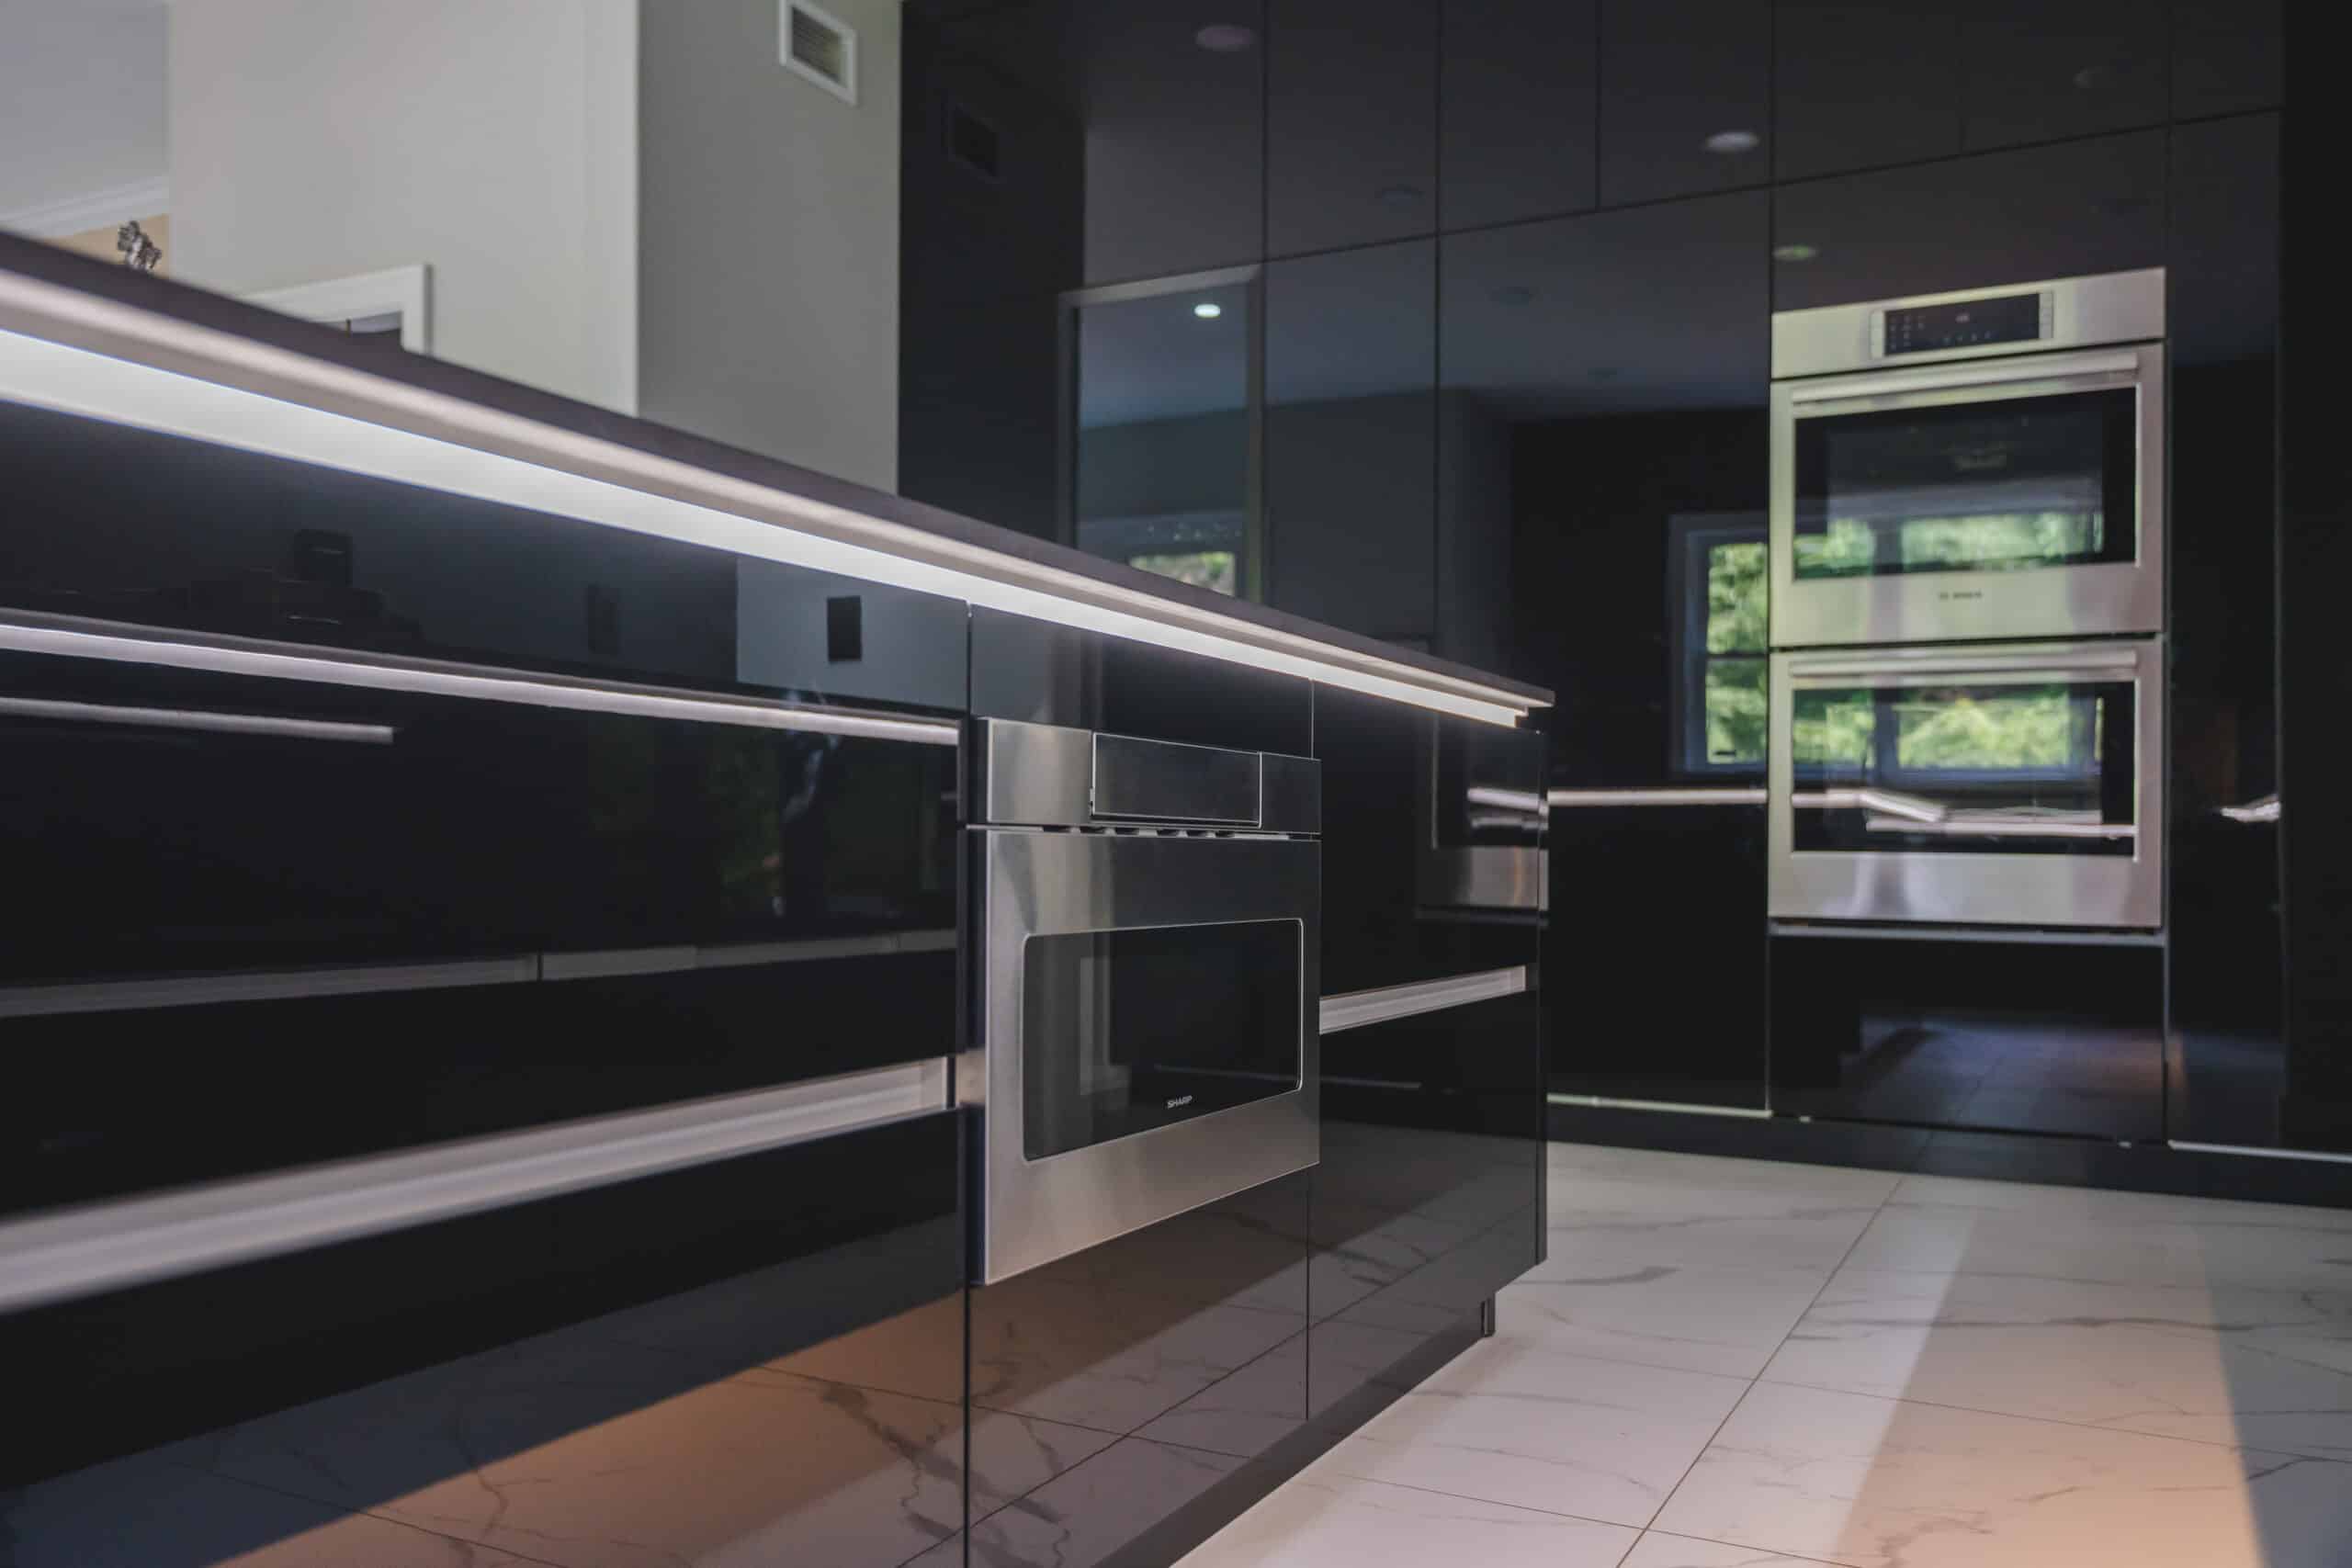 A contemporary kitchen featuring sleek black cabinets and stainless steel appliances